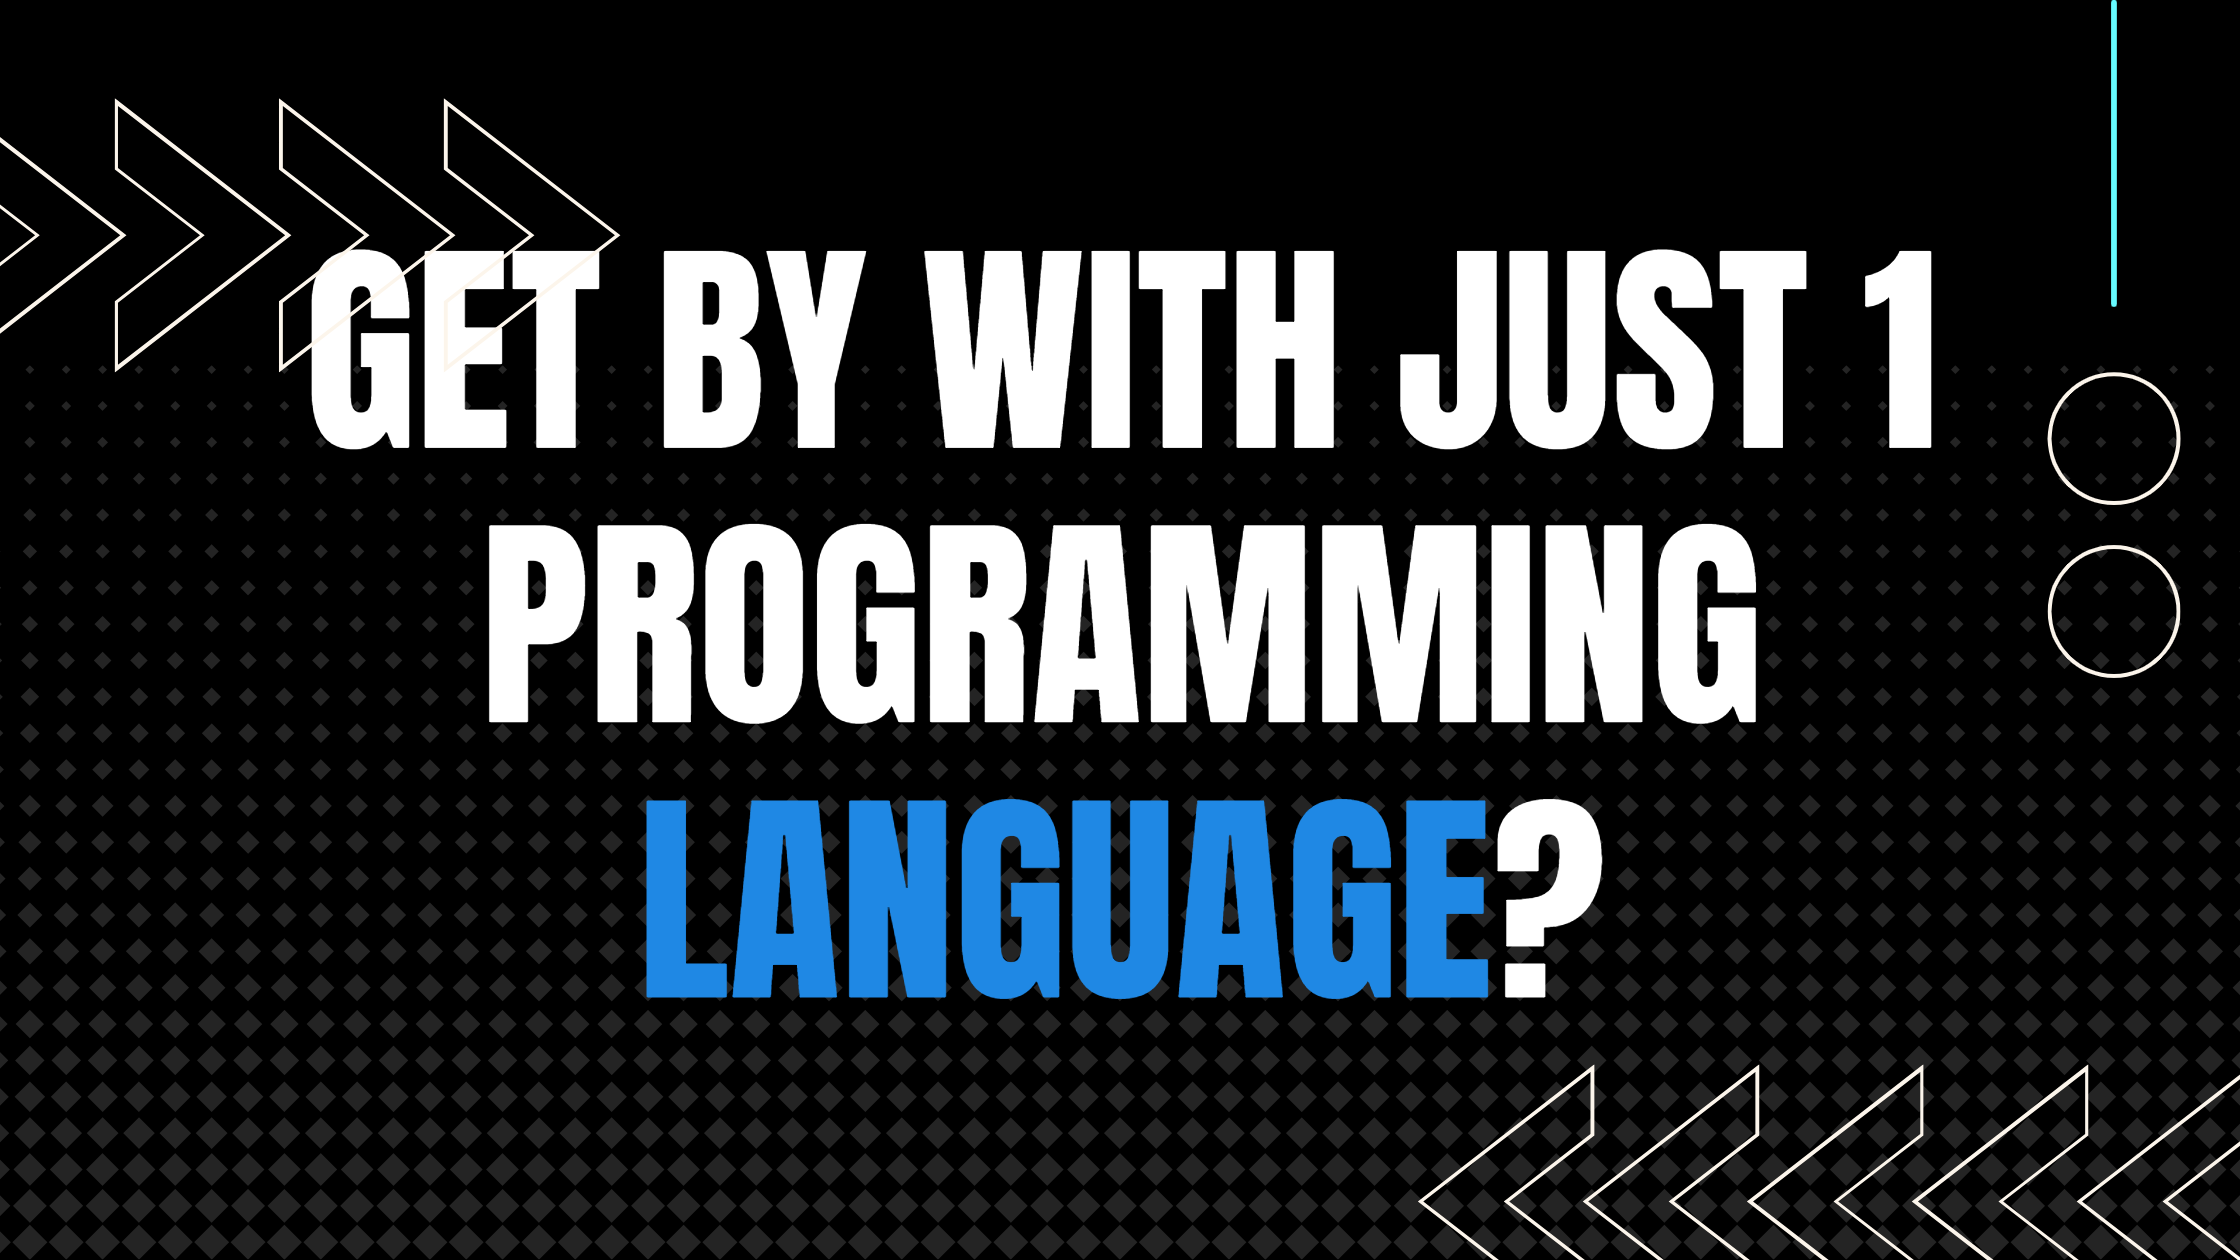 Can you get by with just 1 programming language?